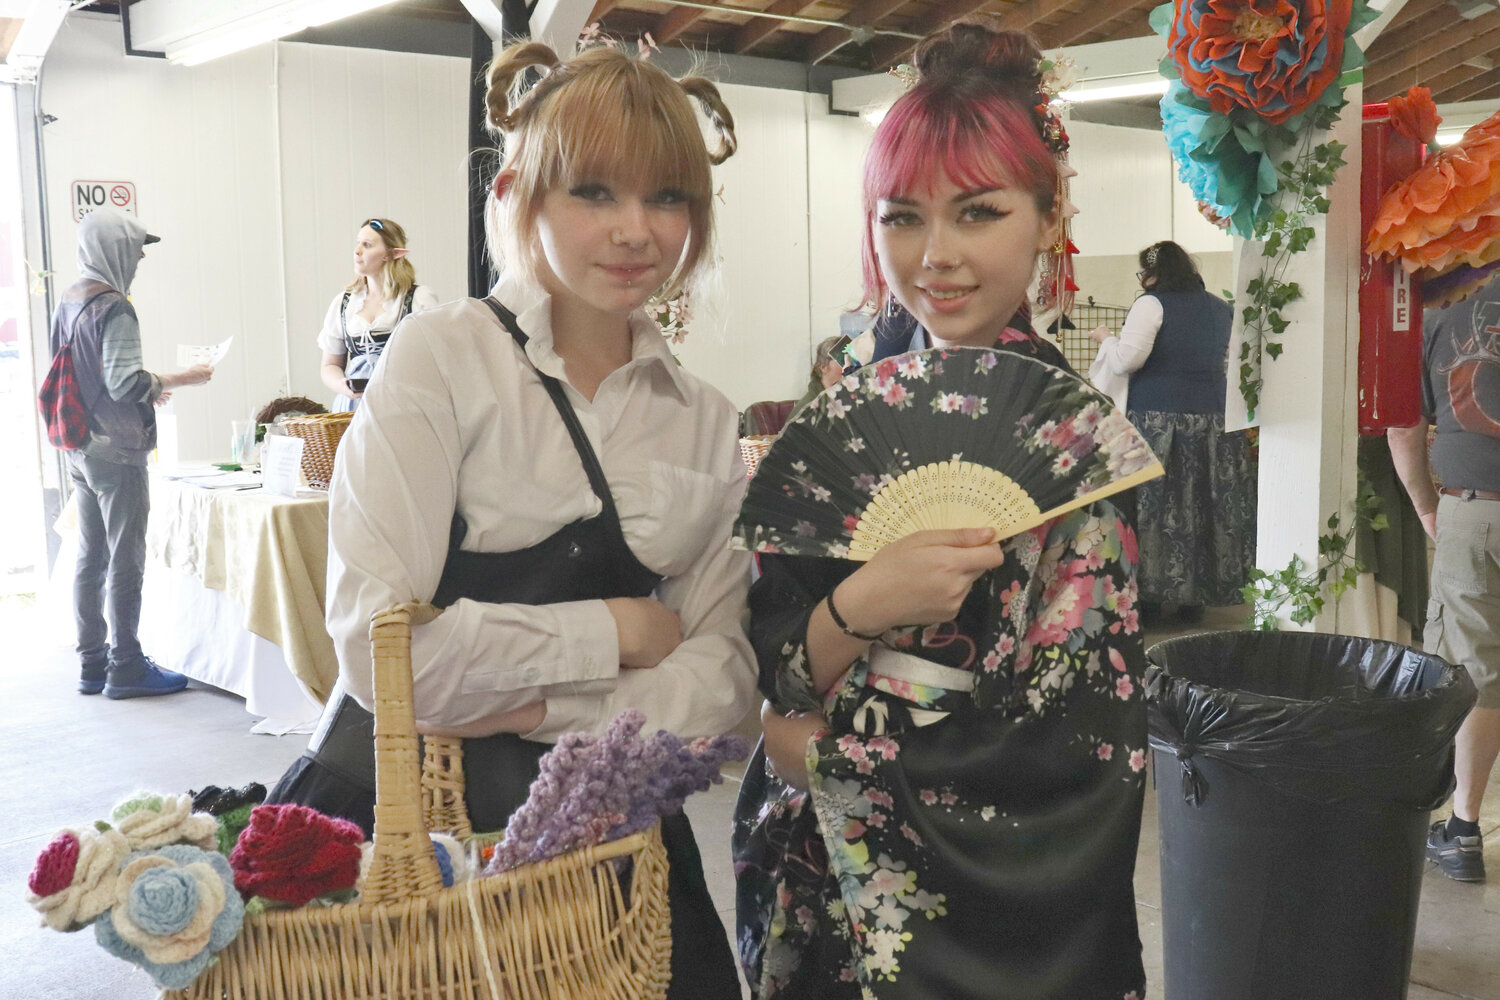 Kay and Alexis Thompson pose for a photo in costume during the Centralia Fantasy Festival at the Southwest Washington Fairgrounds in Chehalis on Saturday, May 27.